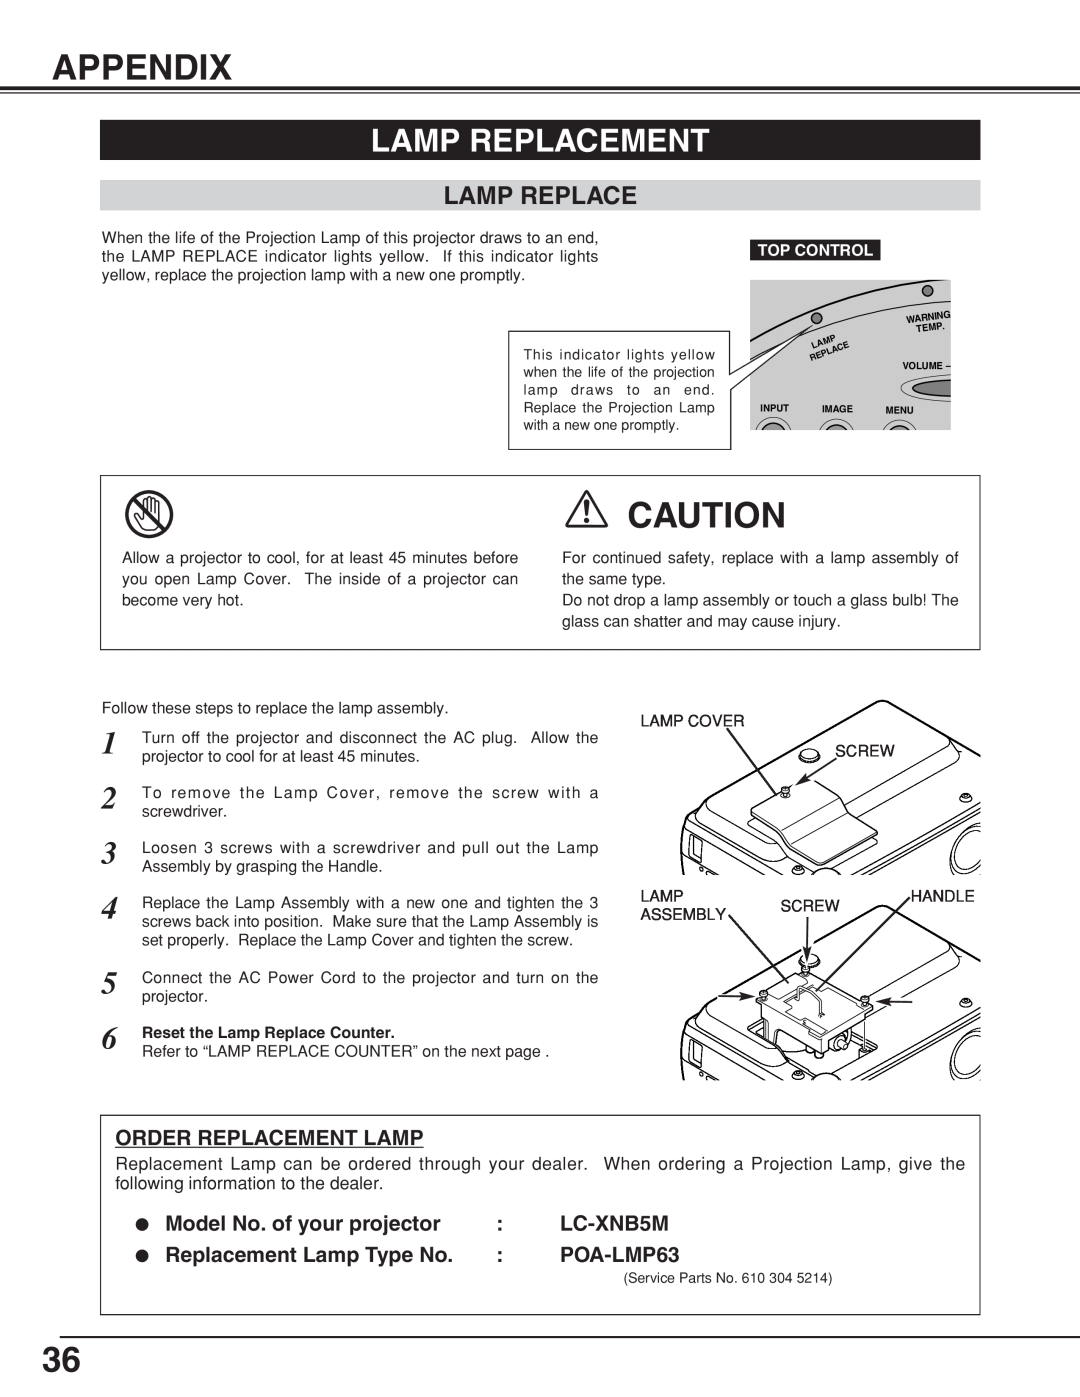 Eiki LC-XNB5M owner manual Appendix, Lamp Replacement, Reset the Lamp Replace Counter 